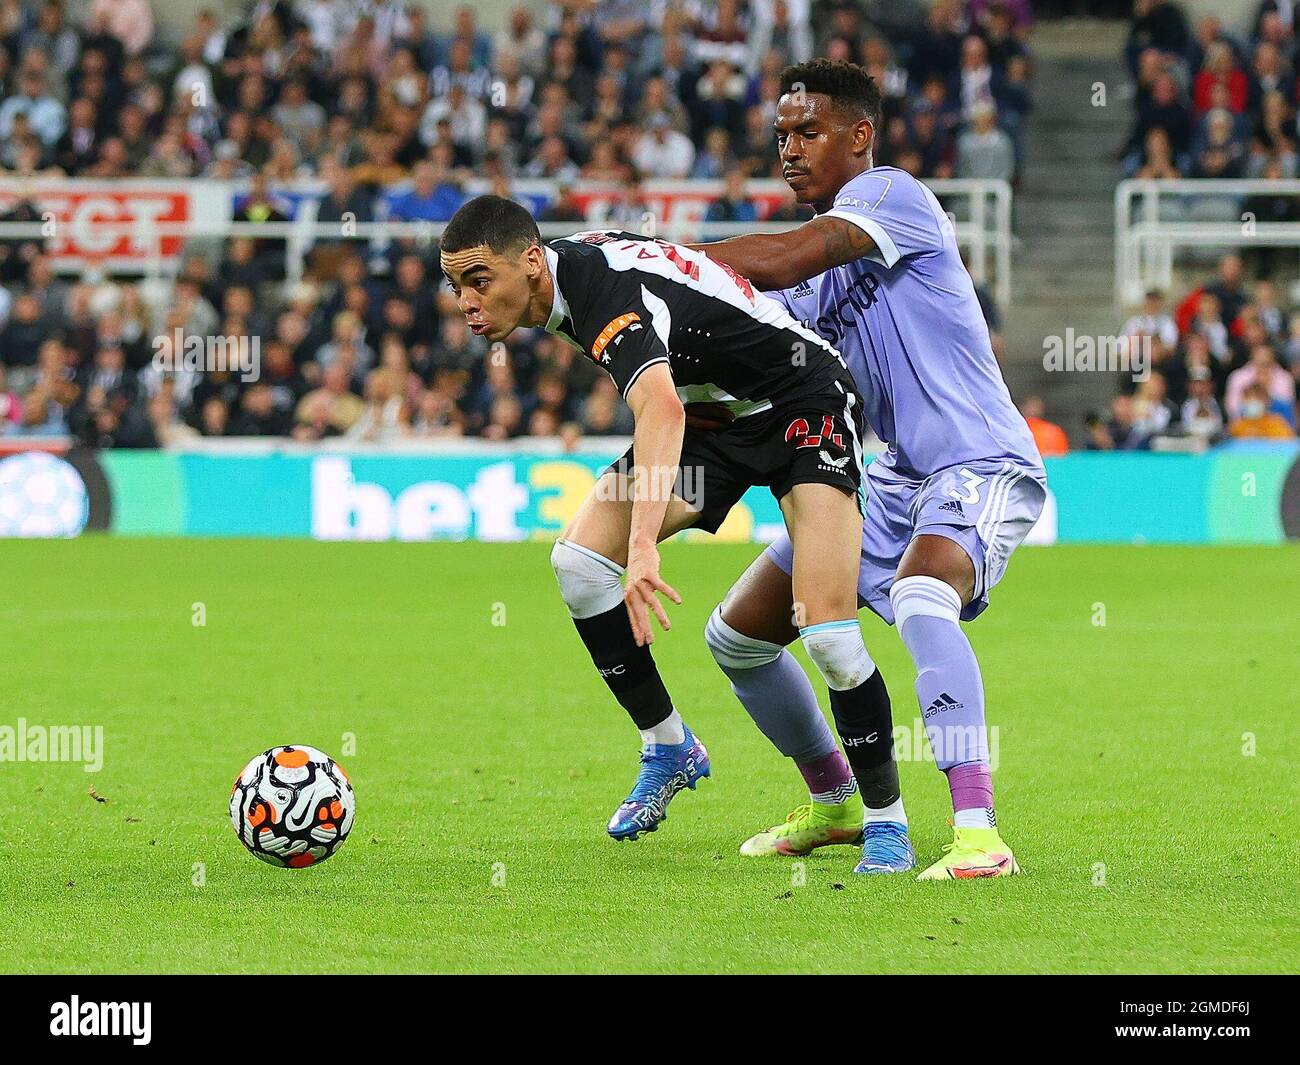 NEWCASTLE UPON TYNE, ENGLAND - SEPTEMBER 17: Miguel Almiron of Newcastle United and Junior Firpo of Leeds United during the Premier League match between Newcastle United and Leeds United at St. James Park on September 17, 2021 in Newcastle upon Tyne, England. (Photo by MB Media) Stock Photo